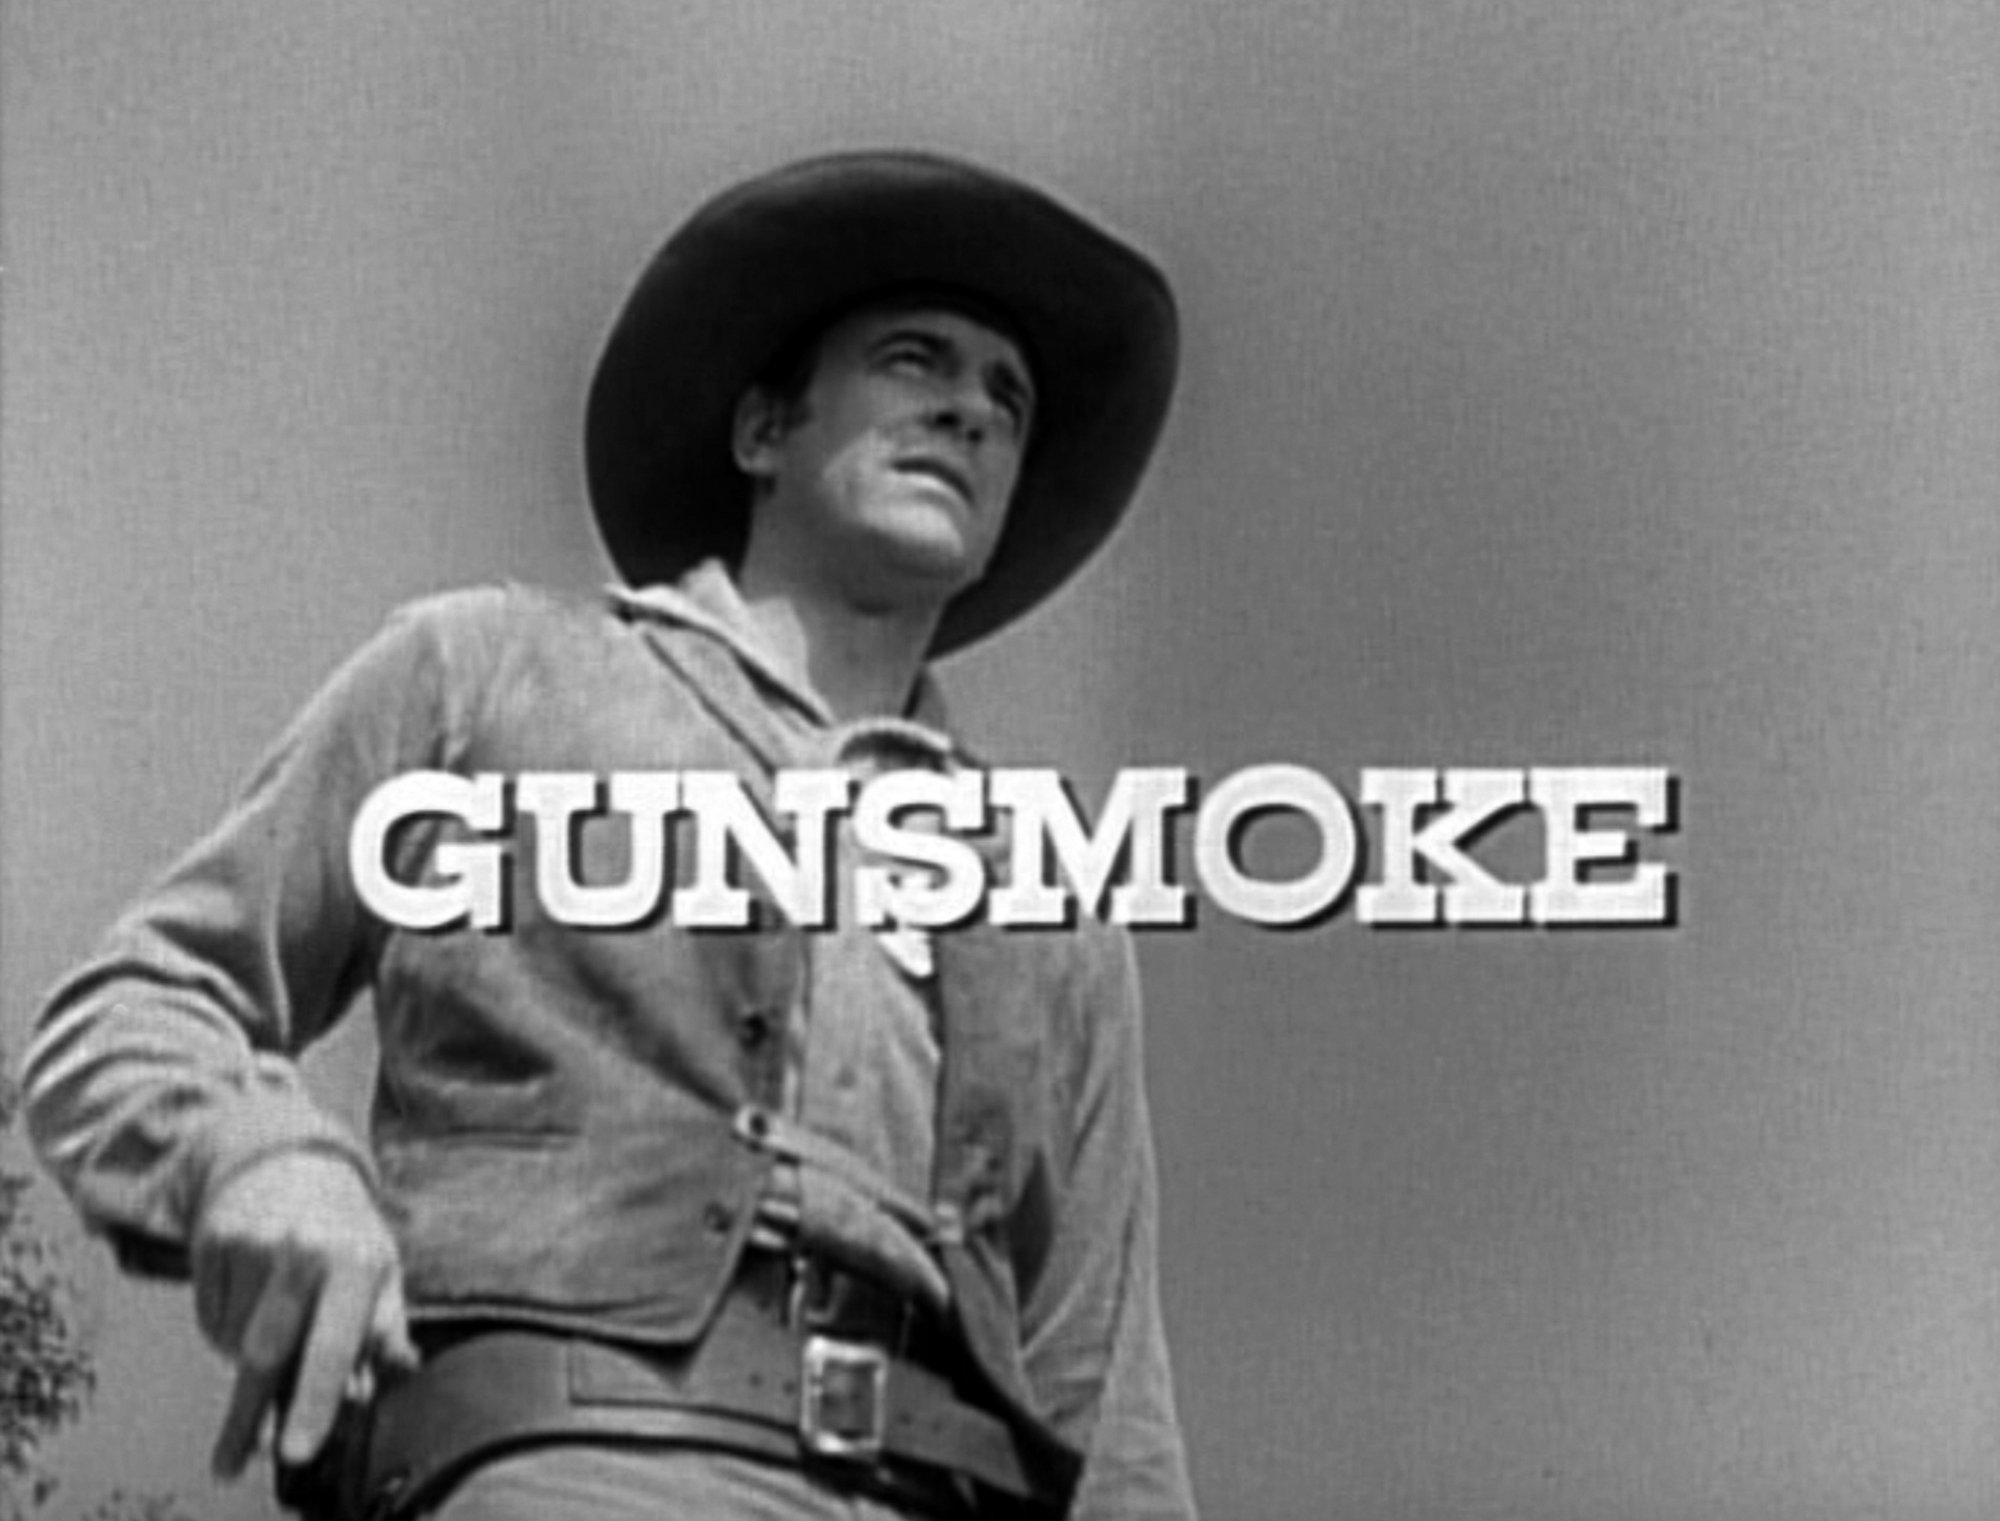 ‘Gunsmoke’ Producer Explained Why the Show’s Biggest ‘Clunker’ Episodes Weren’t Any Good